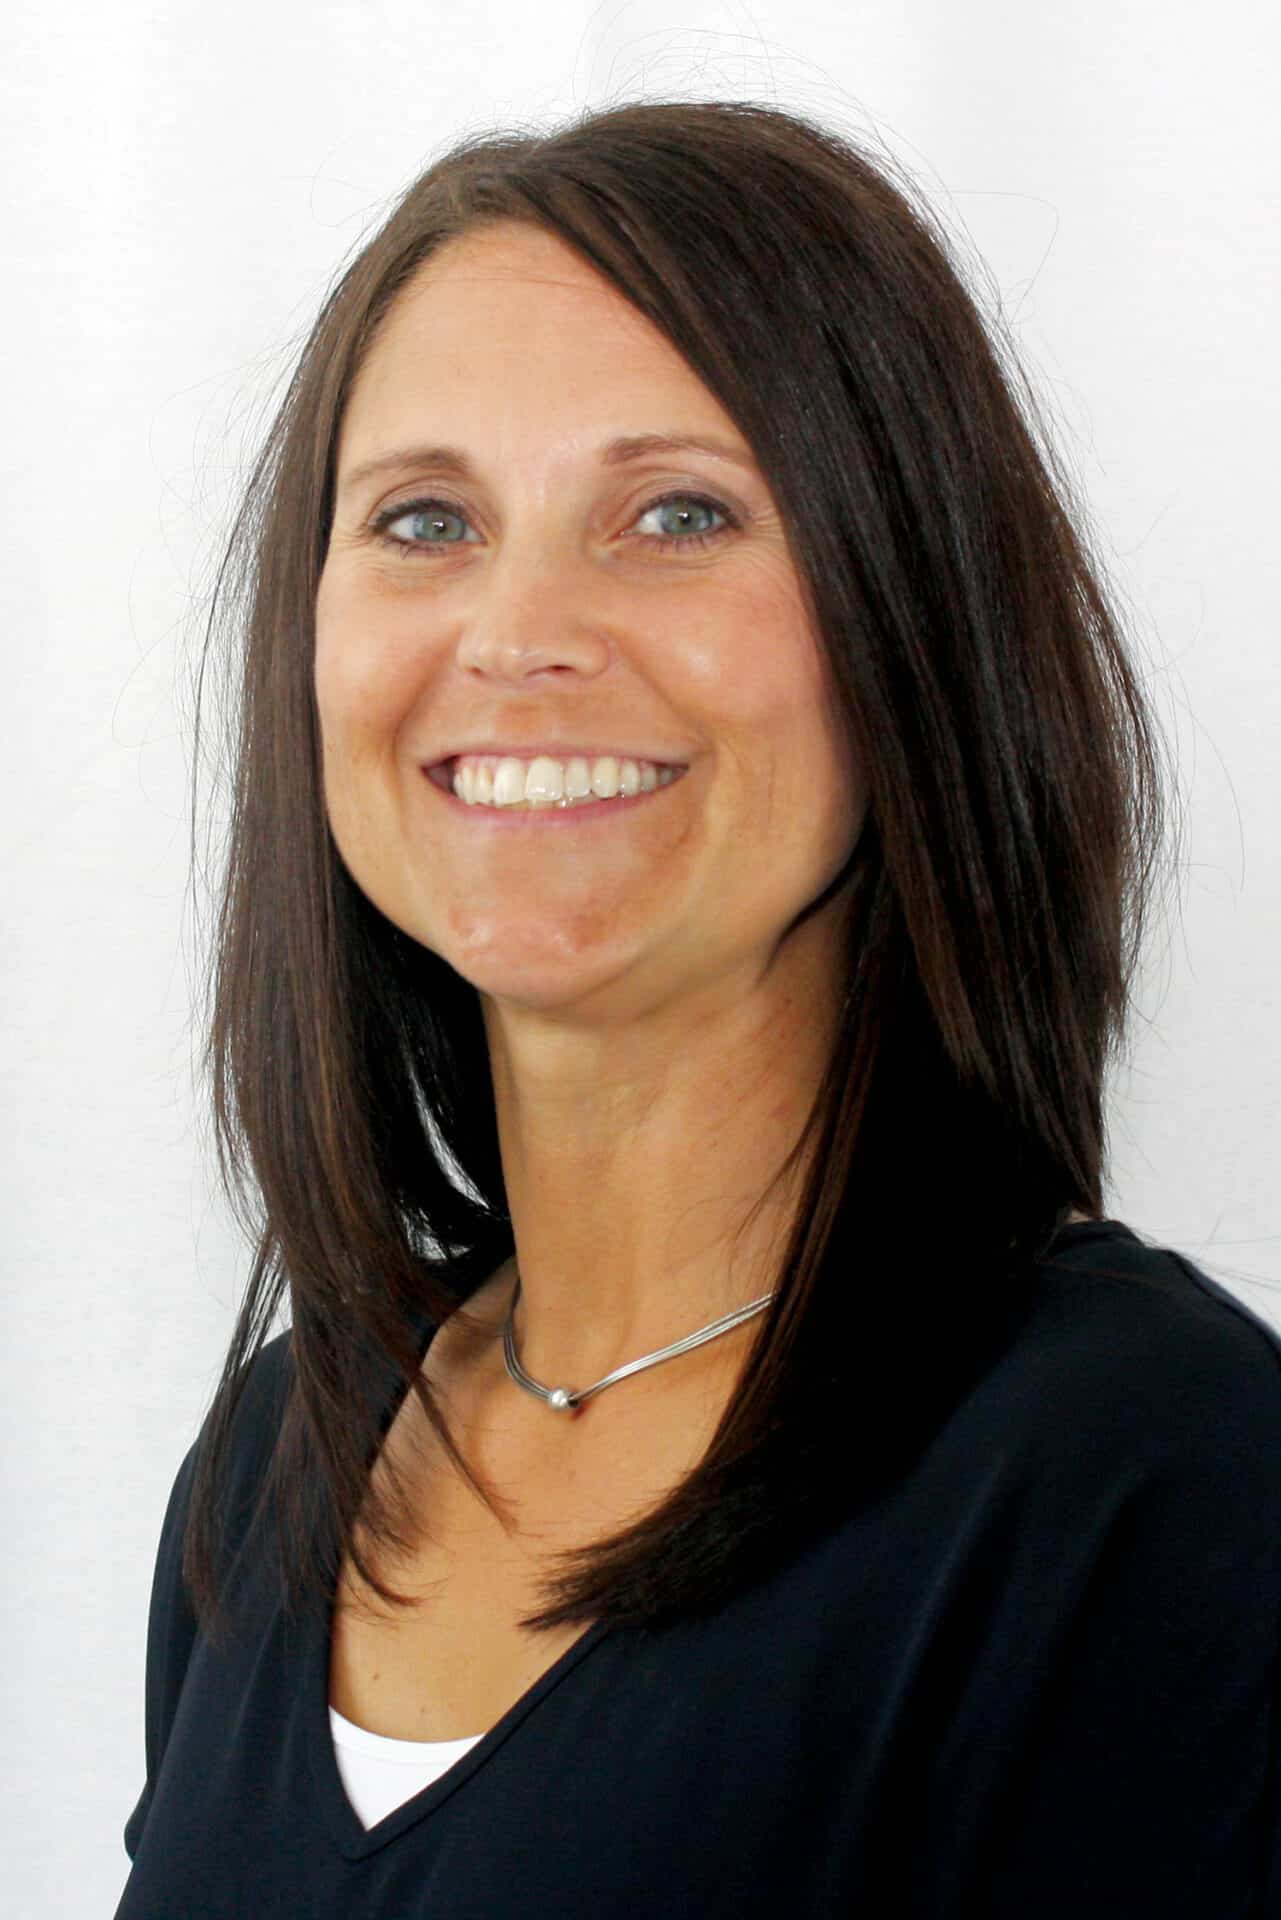 Nicole Sammons, OTR/L
Nicole graduated from the University of Wisconsin, Lacrosse in 2001. Nicole's therapy interests include orthopedics, Parkinson's Disease and neurological rehabilitation. Nicole is married with four children and enjoys sporting activities and time with her family and friends.